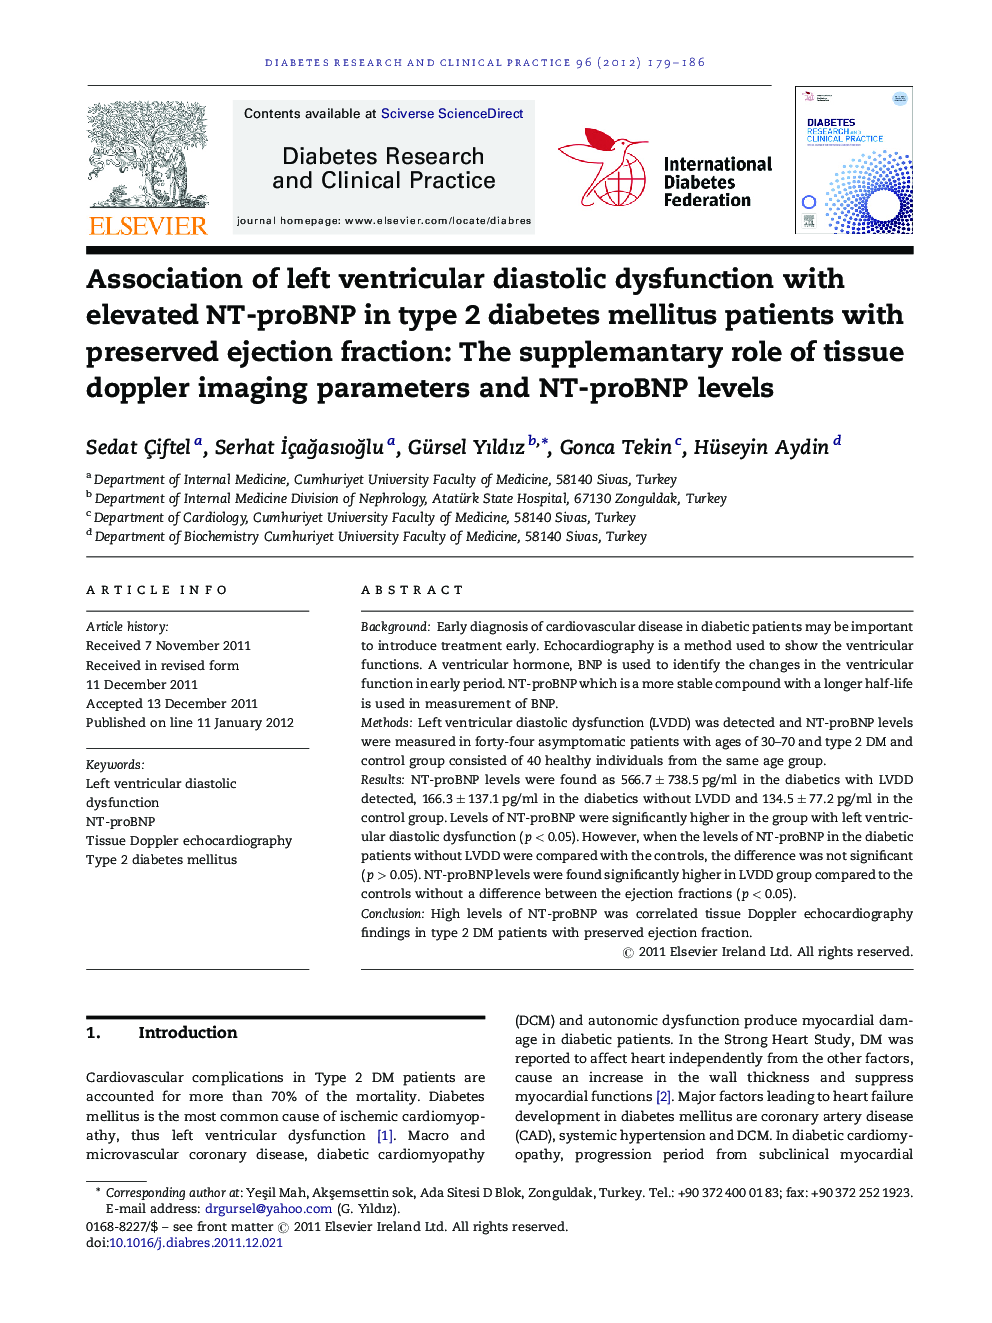 Association of left ventricular diastolic dysfunction with elevated NT-proBNP in type 2 diabetes mellitus patients with preserved ejection fraction: The supplemantary role of tissue doppler imaging parameters and NT-proBNP levels